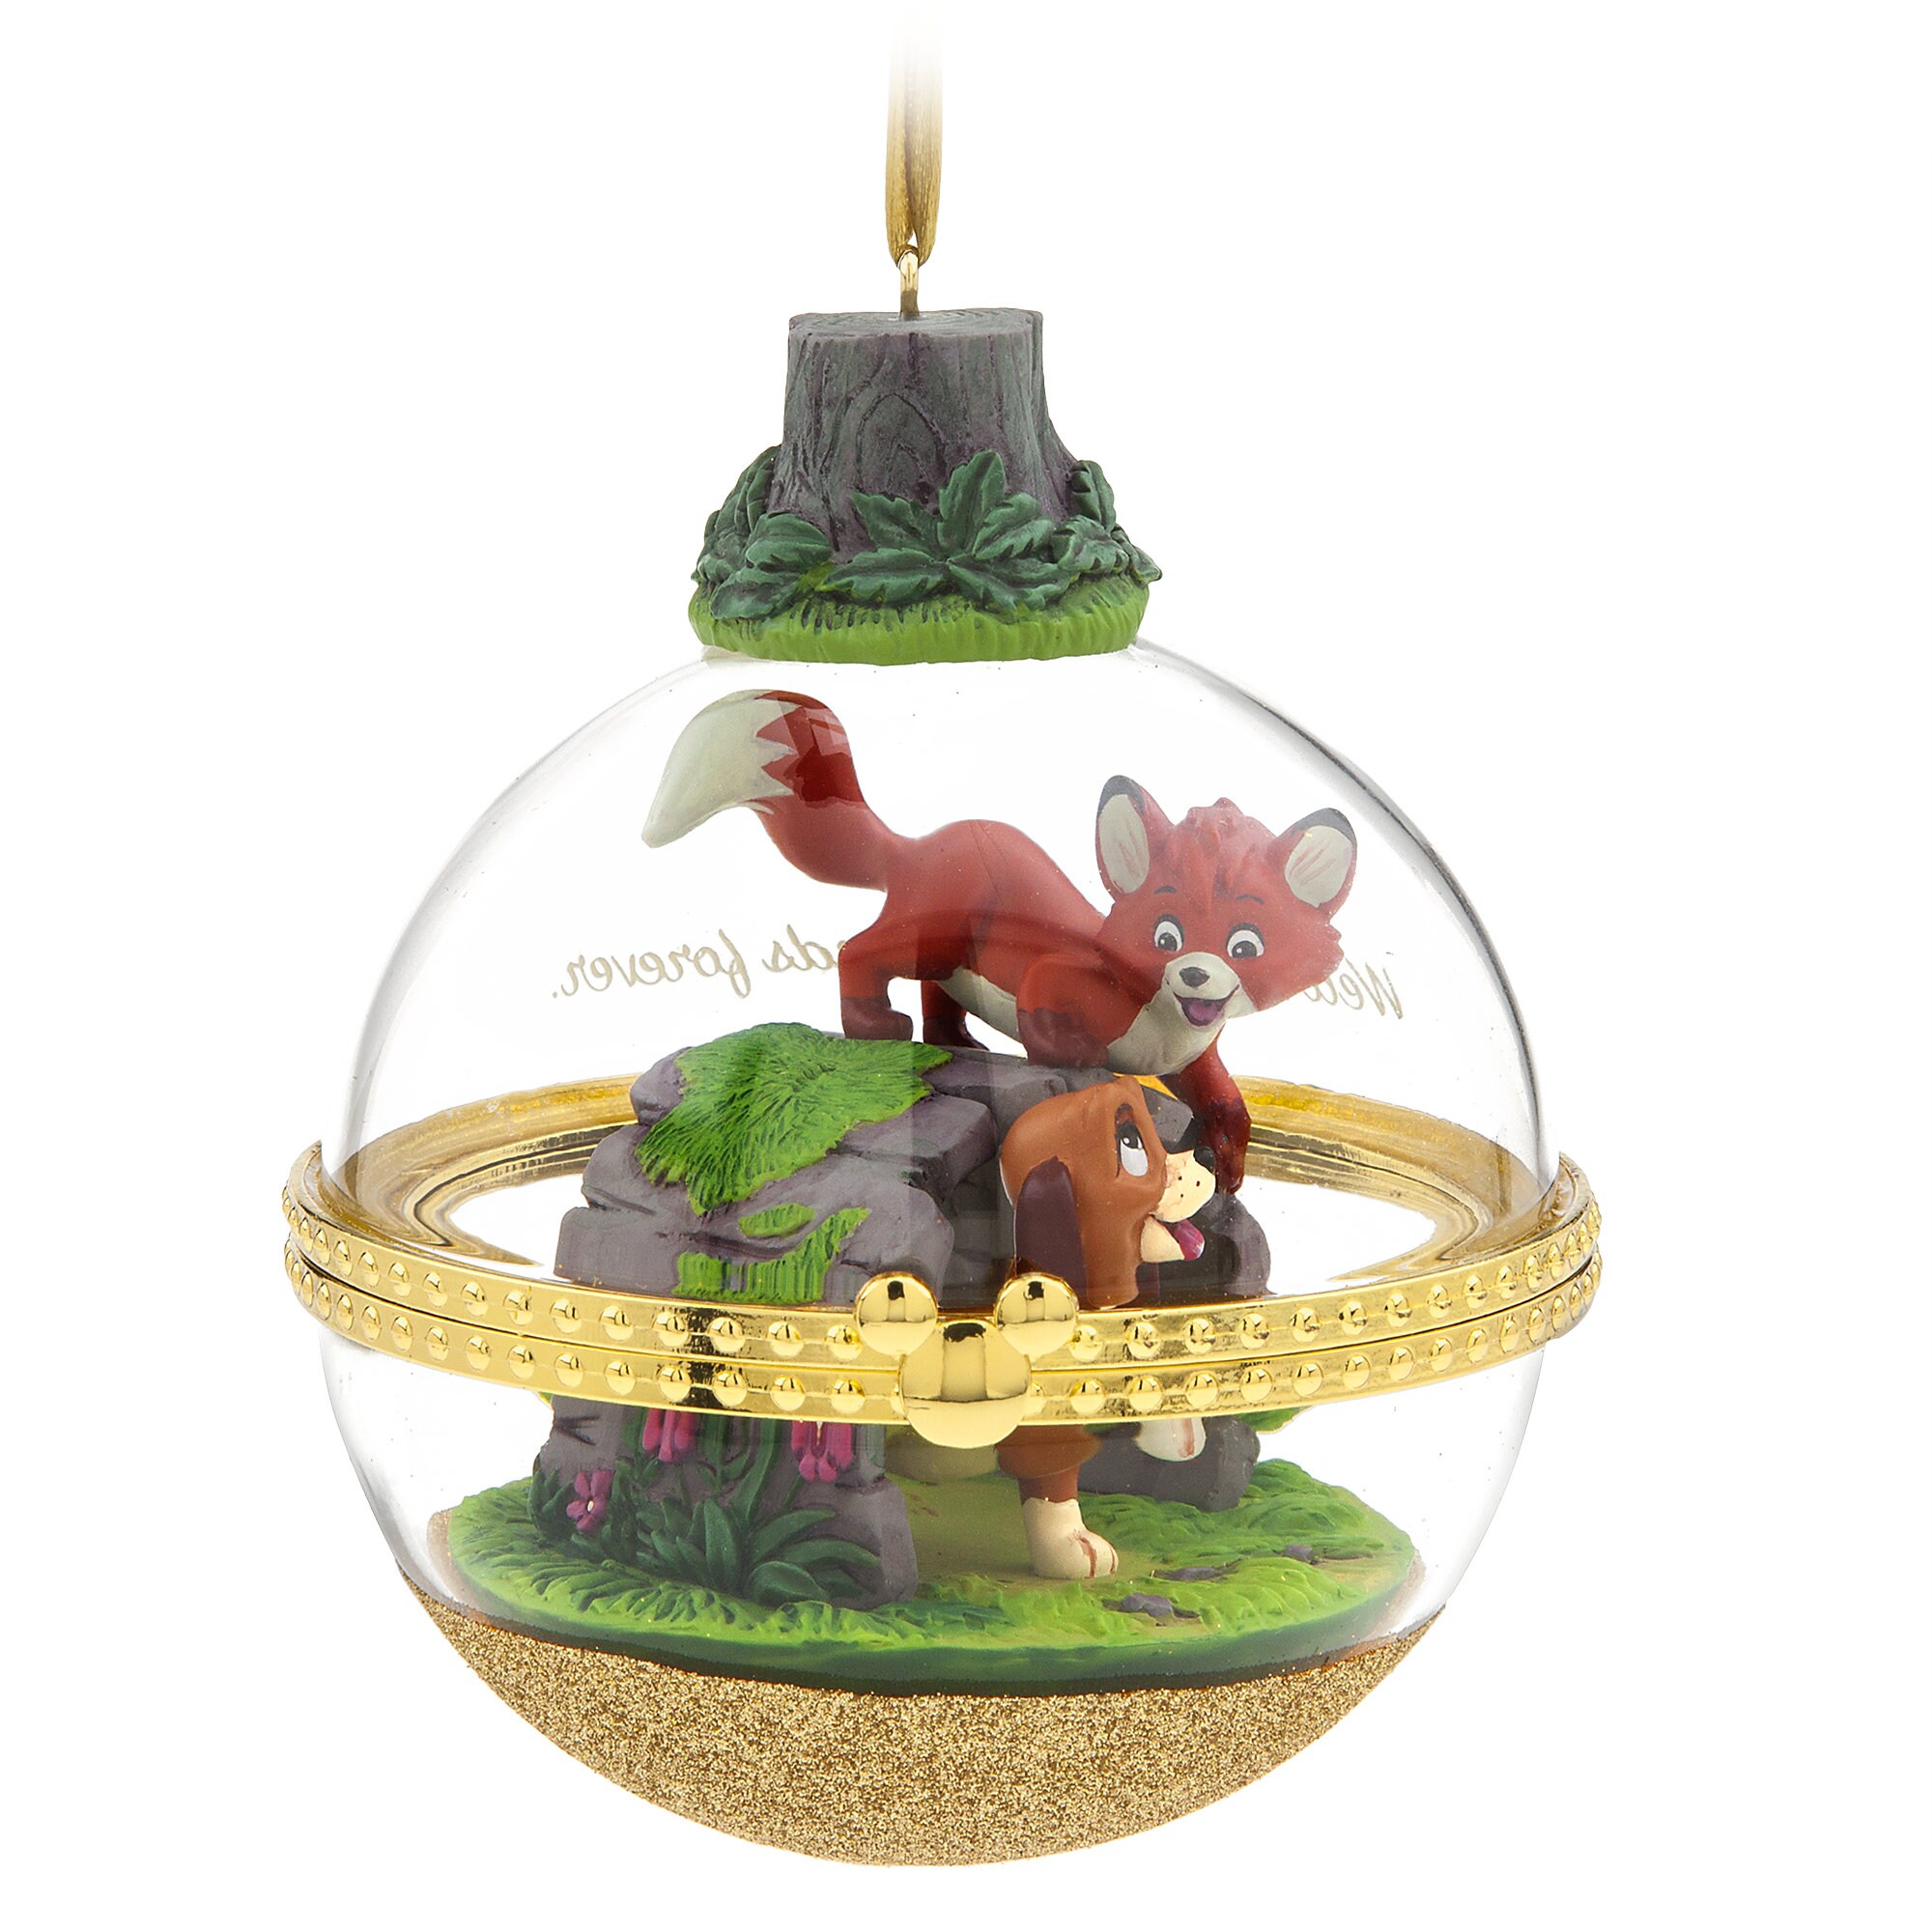 The Fox and the Hound Disney Duos Sketchbook Ornament - July - Limited Release